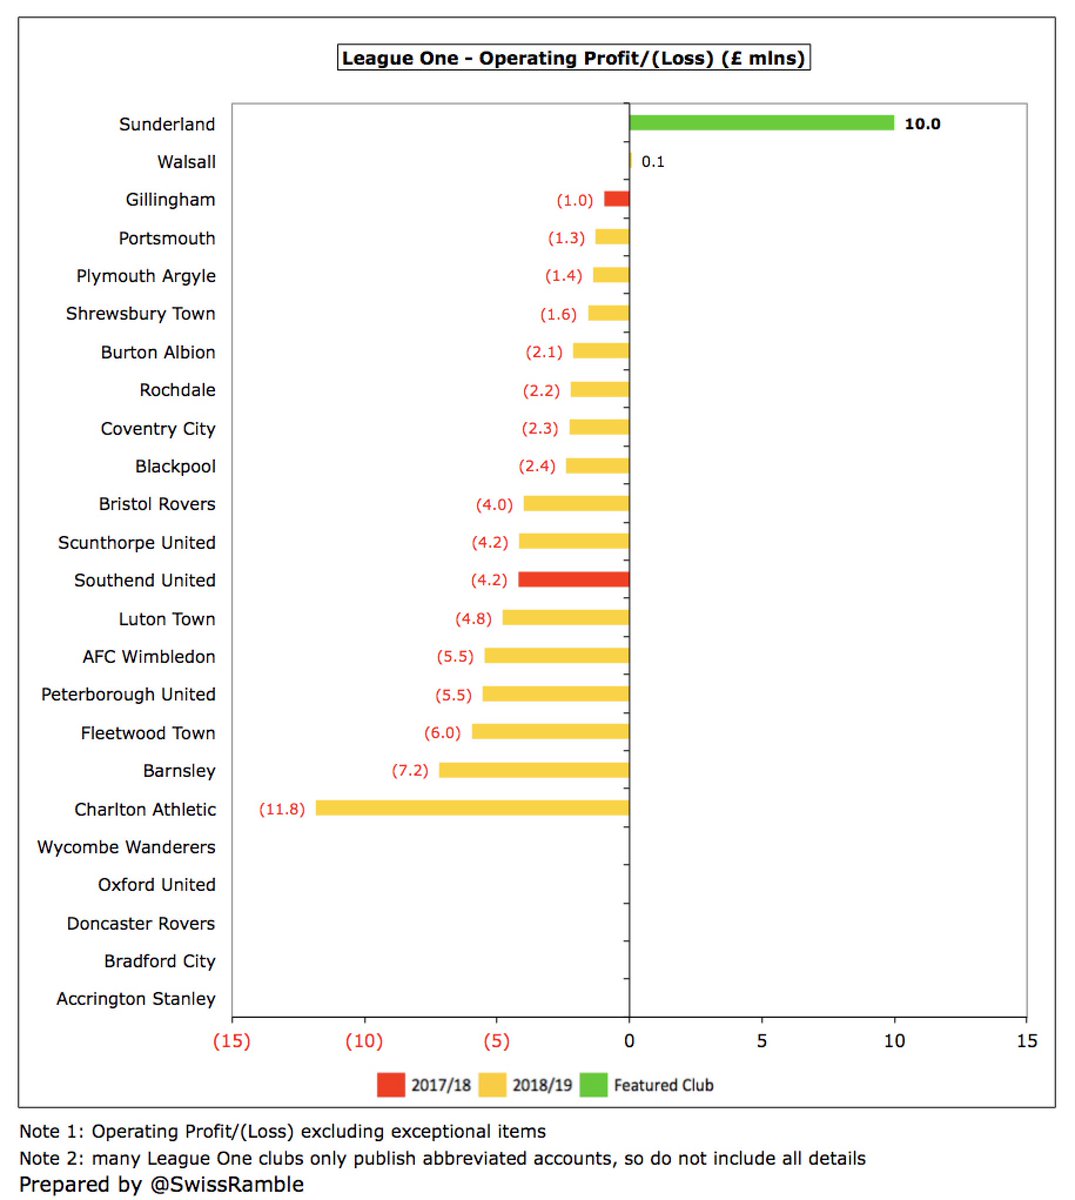  #SAFC £10m surplus is even more impressive, as only one other club in League One managed to produce an operating profit – and that was only just above break-even with £0.1m at Walsall.